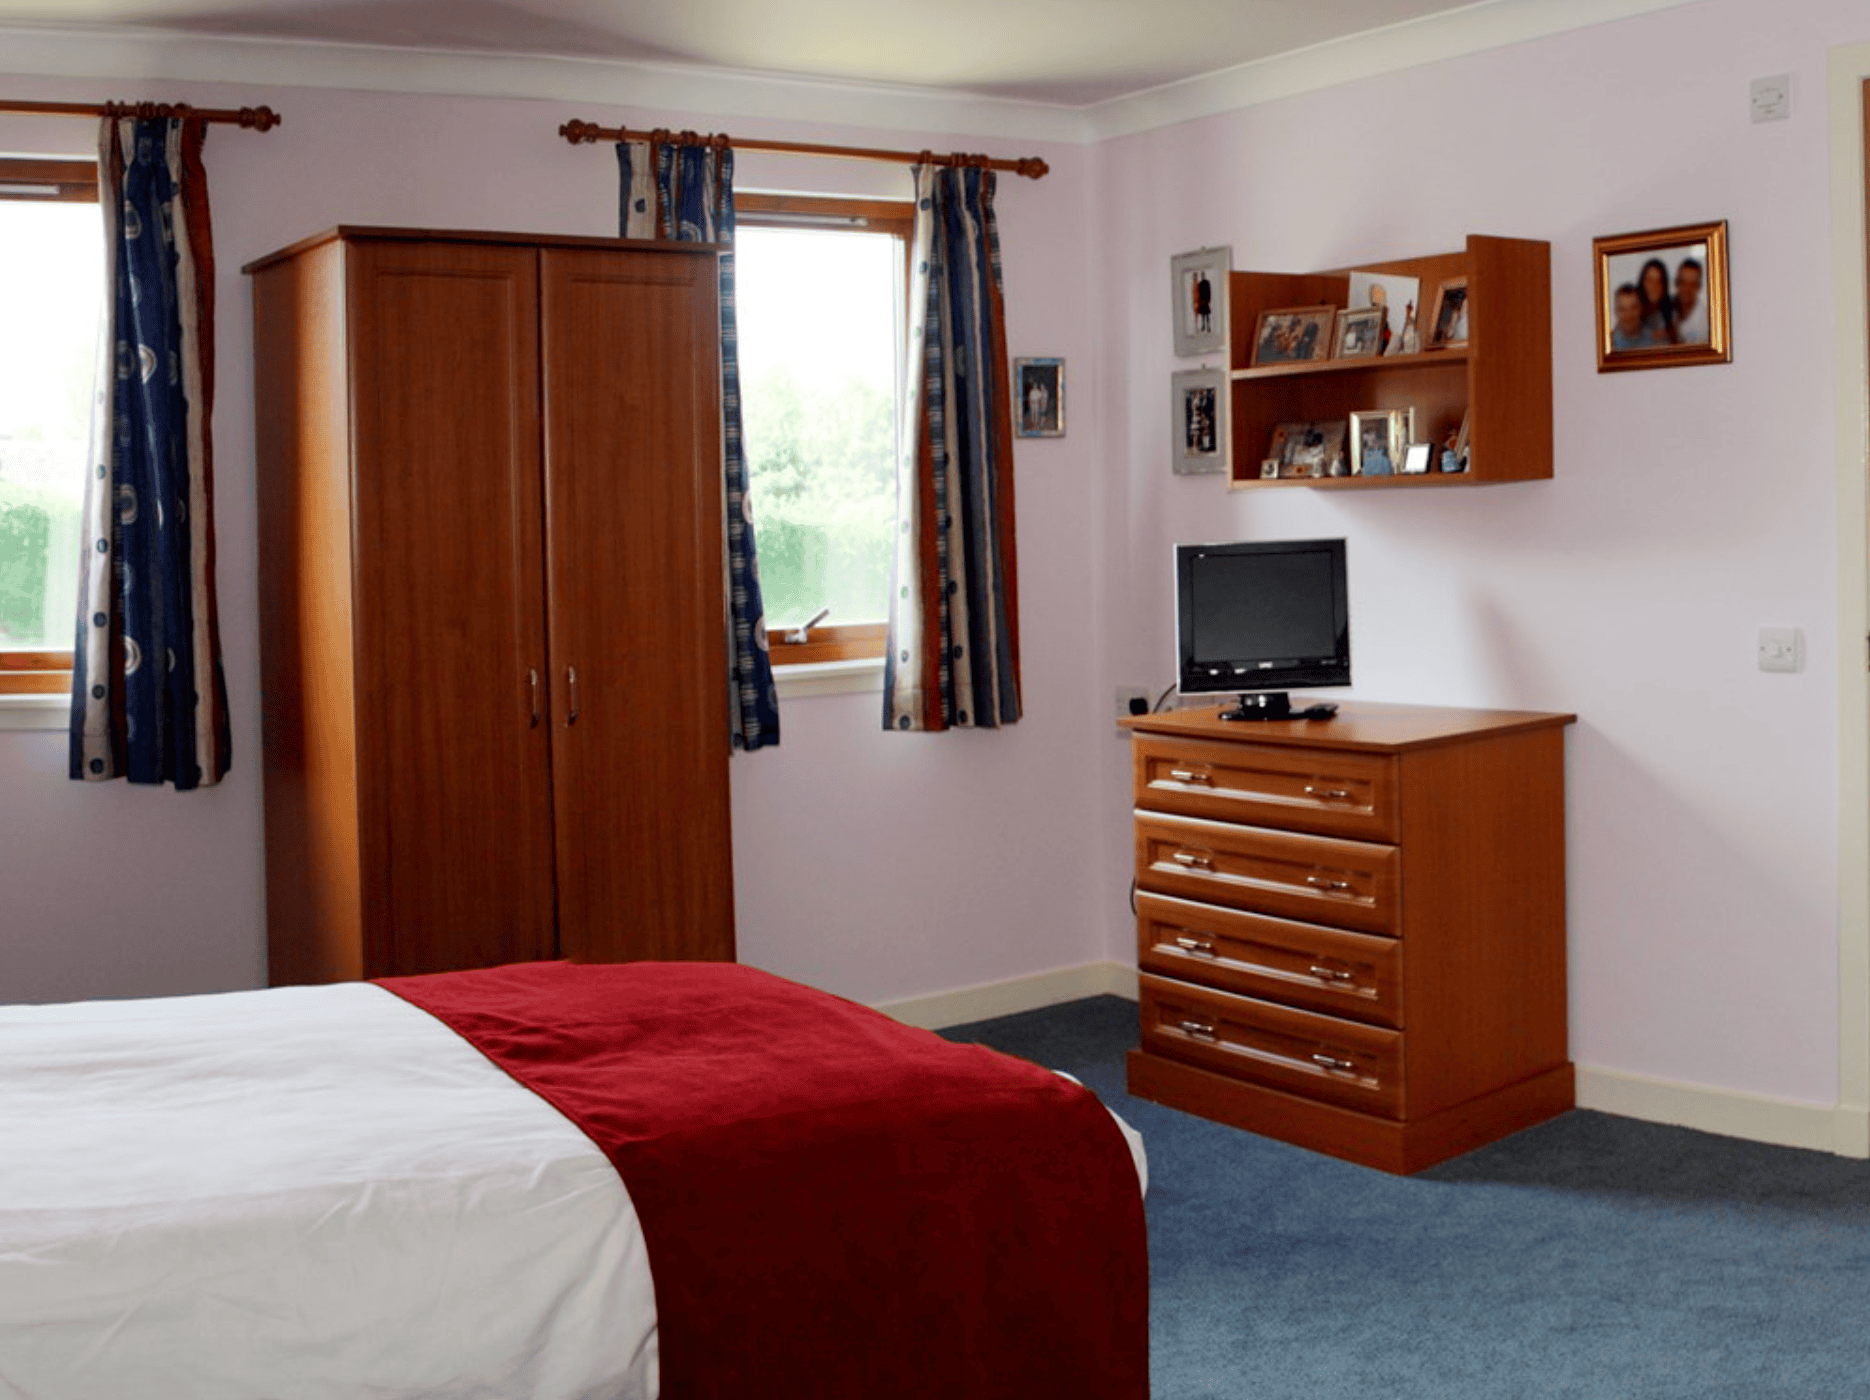 Bedroom at Airthrey Care Home, Airth, Falkirk